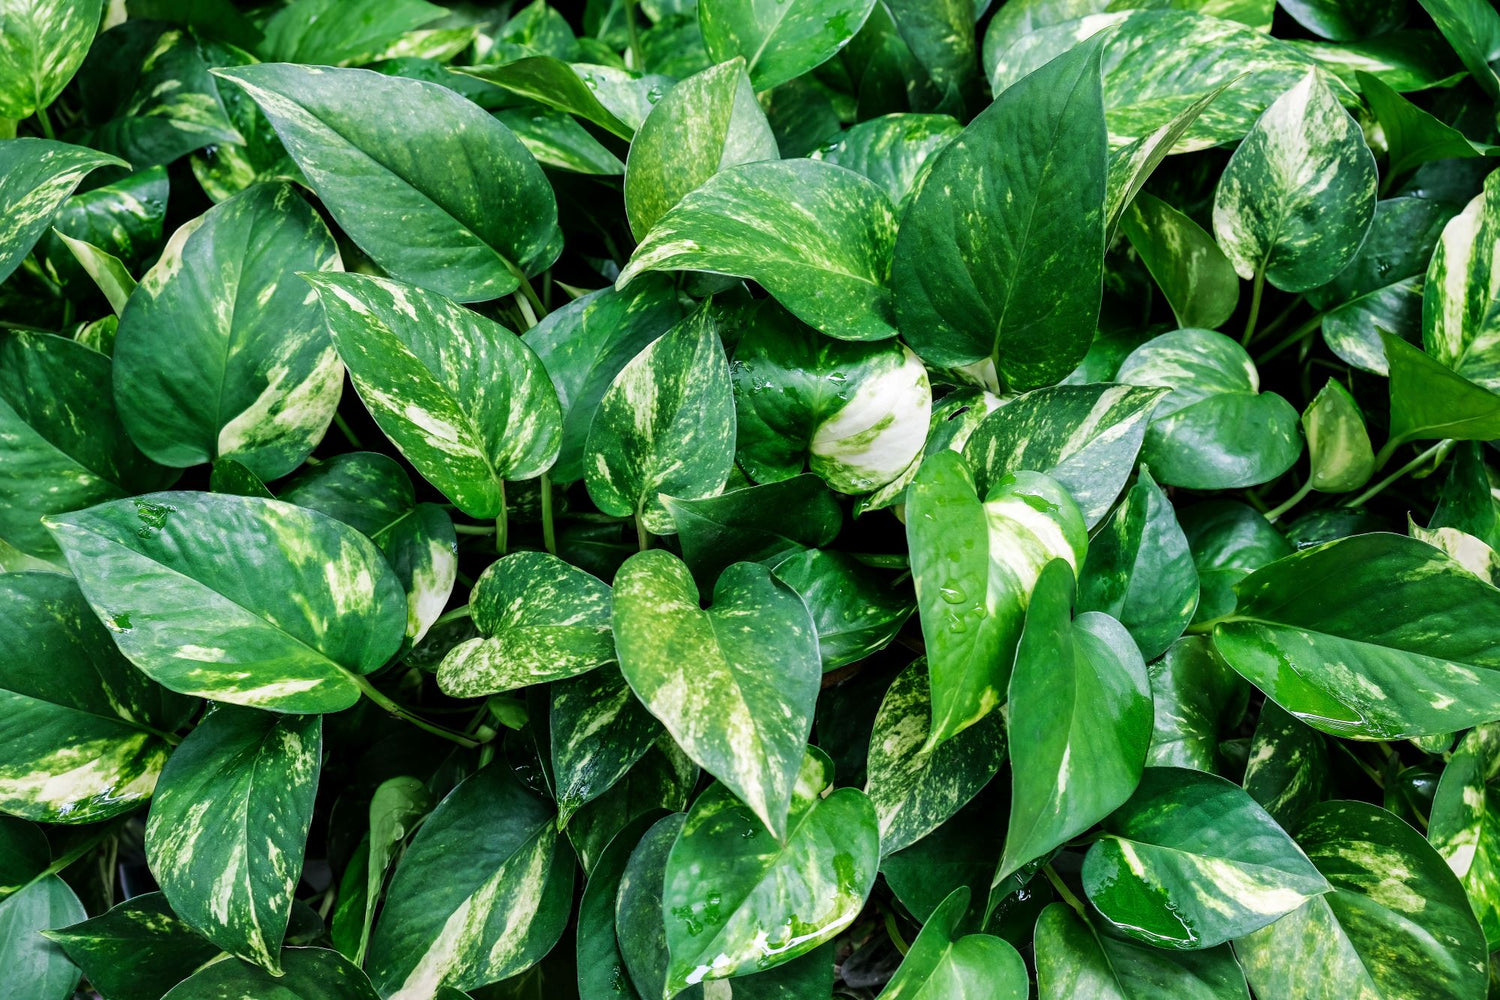 A close-up view of the leaves of a Golden Pothos or Epipremnum aureum houseplant, featuring full green leaves with yellow and white variegation, spreading across the ground.